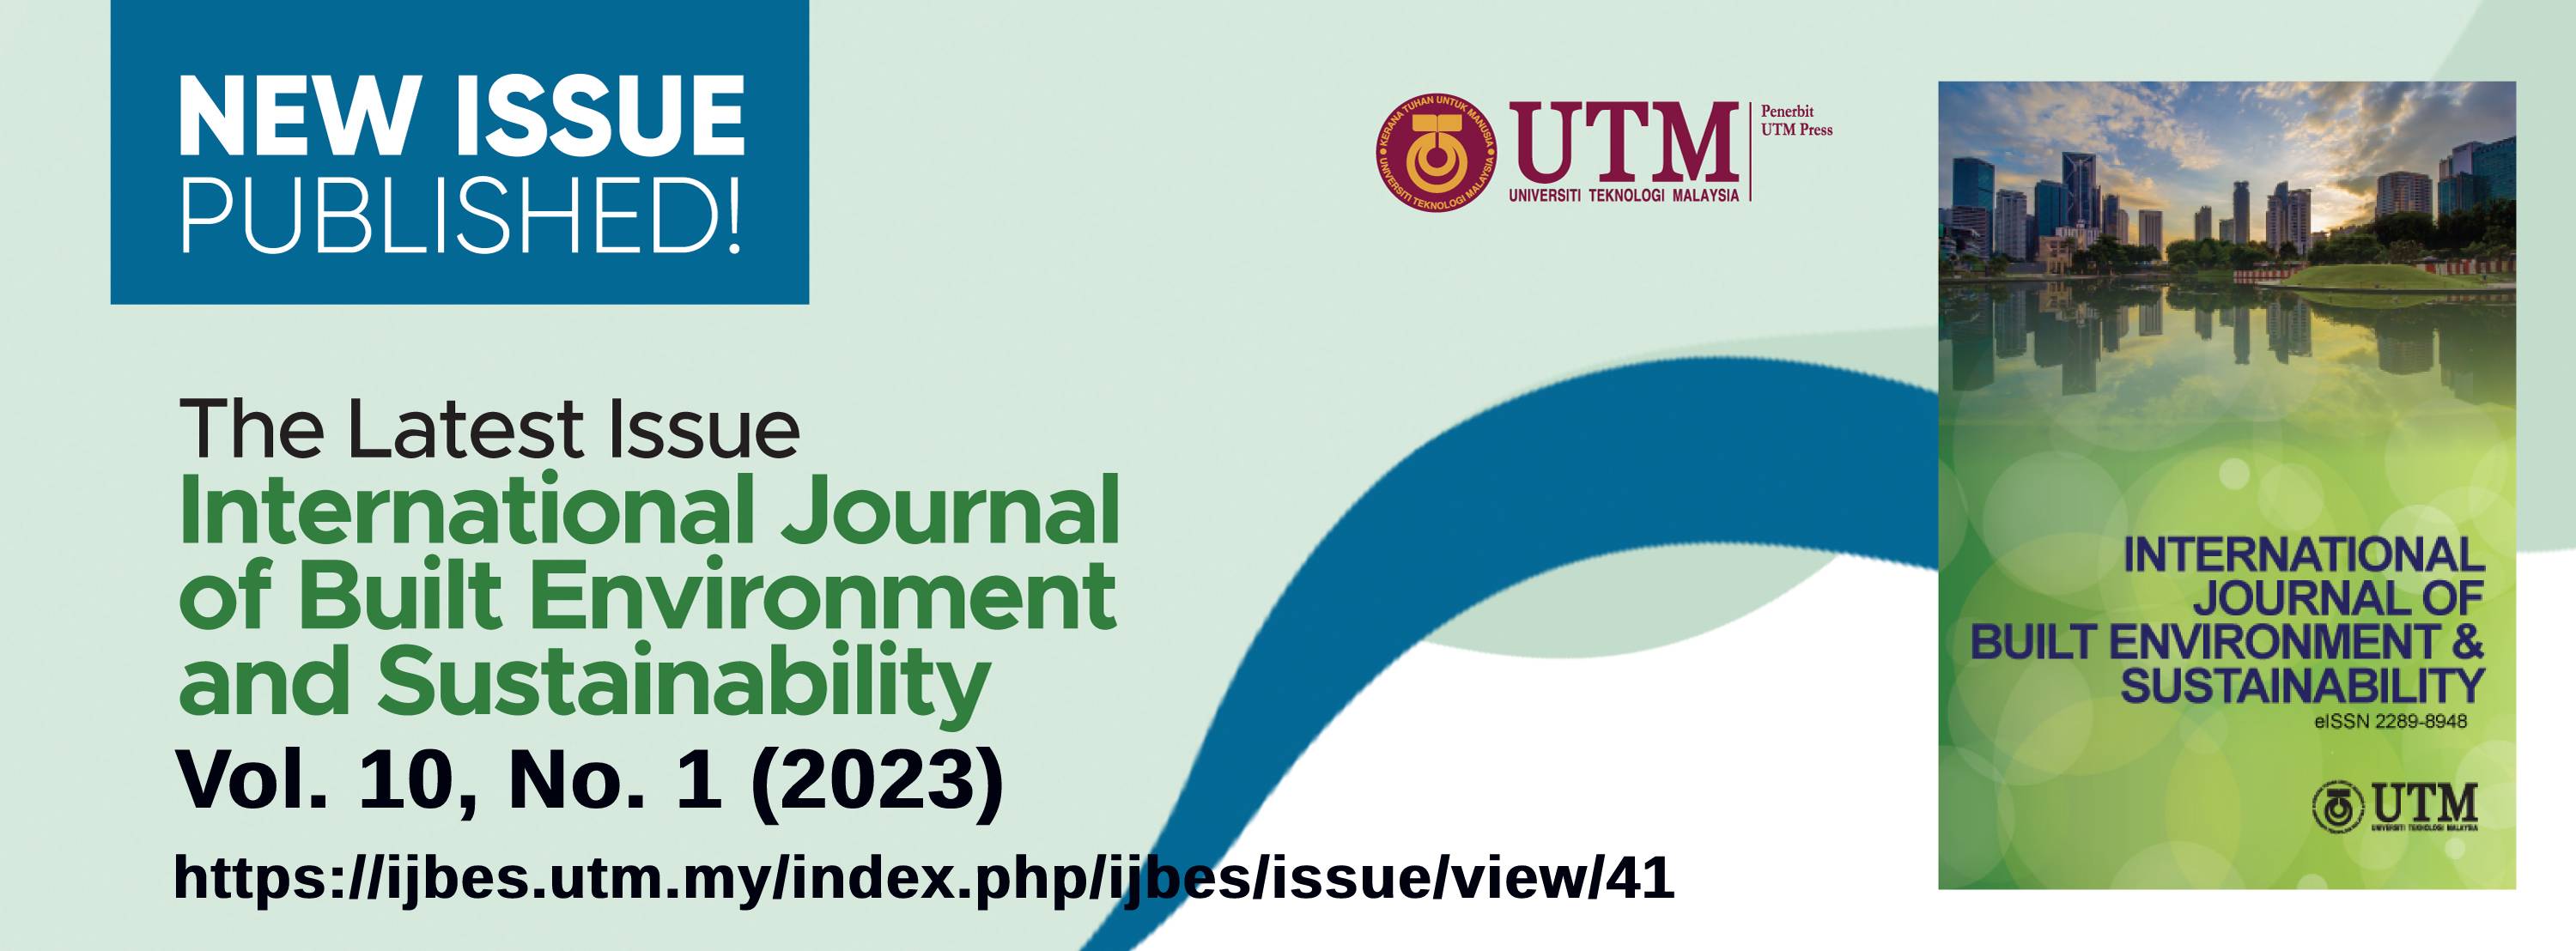 					View International Journal of Built Environment and Sustainability, Volume 10, Issue 1, 2023
				